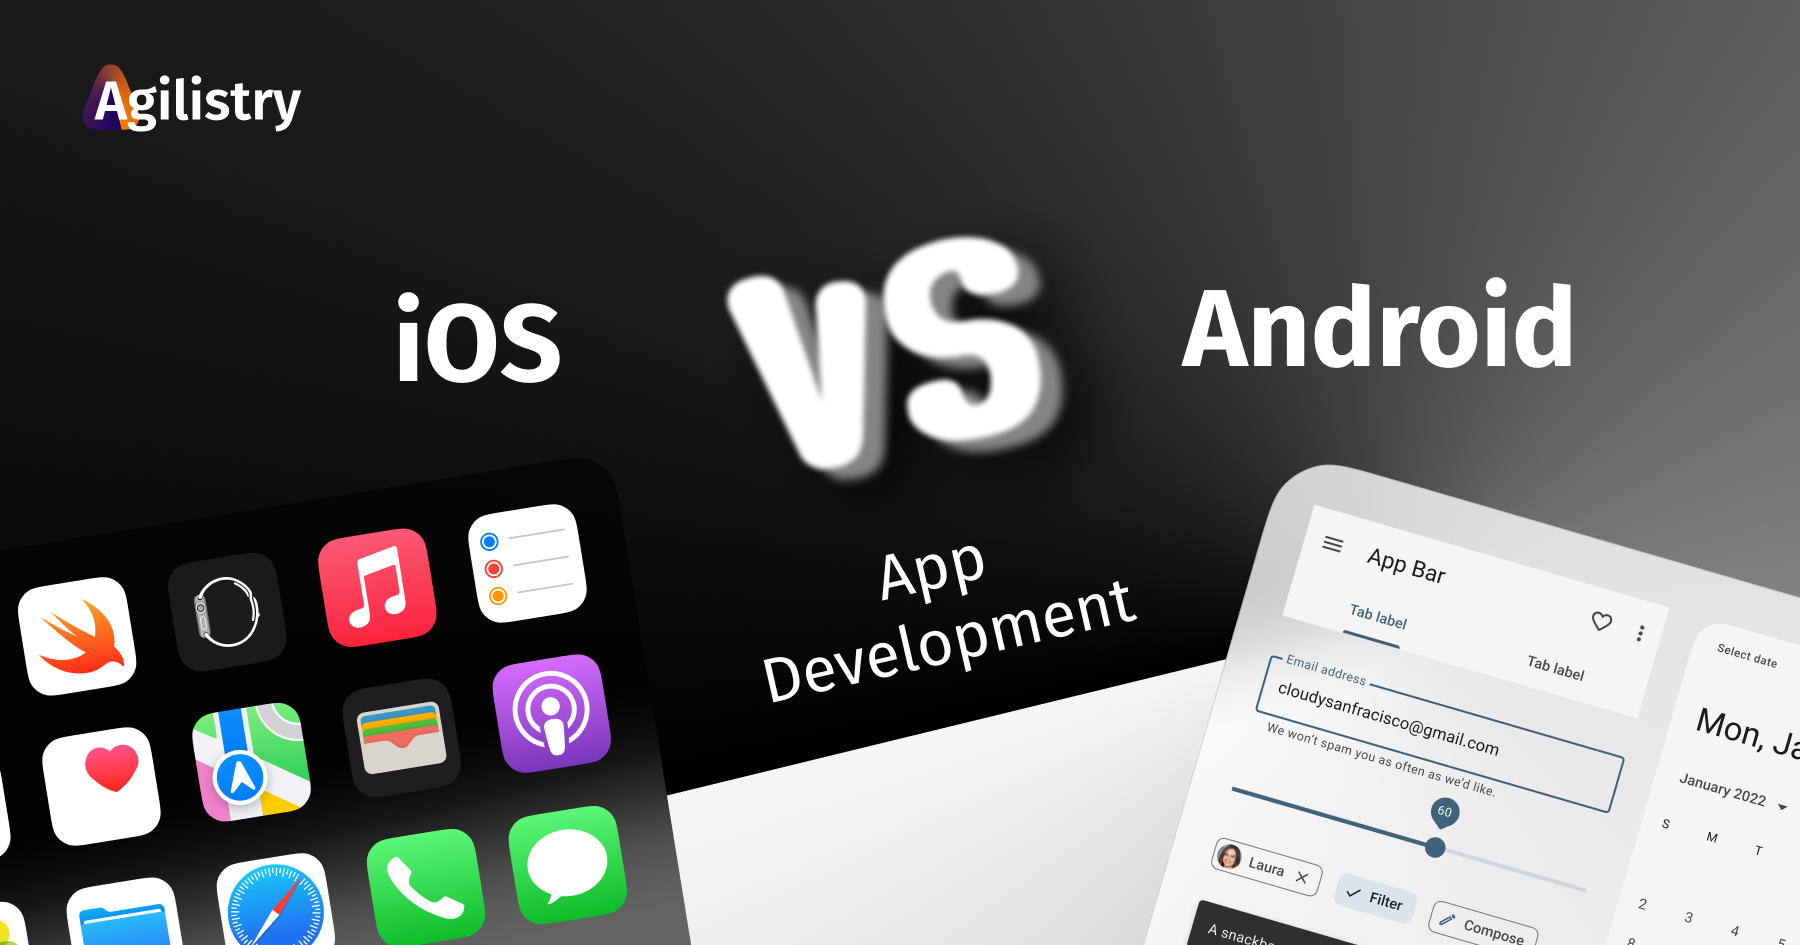 iOS vs. Android App Development: What is the Difference?